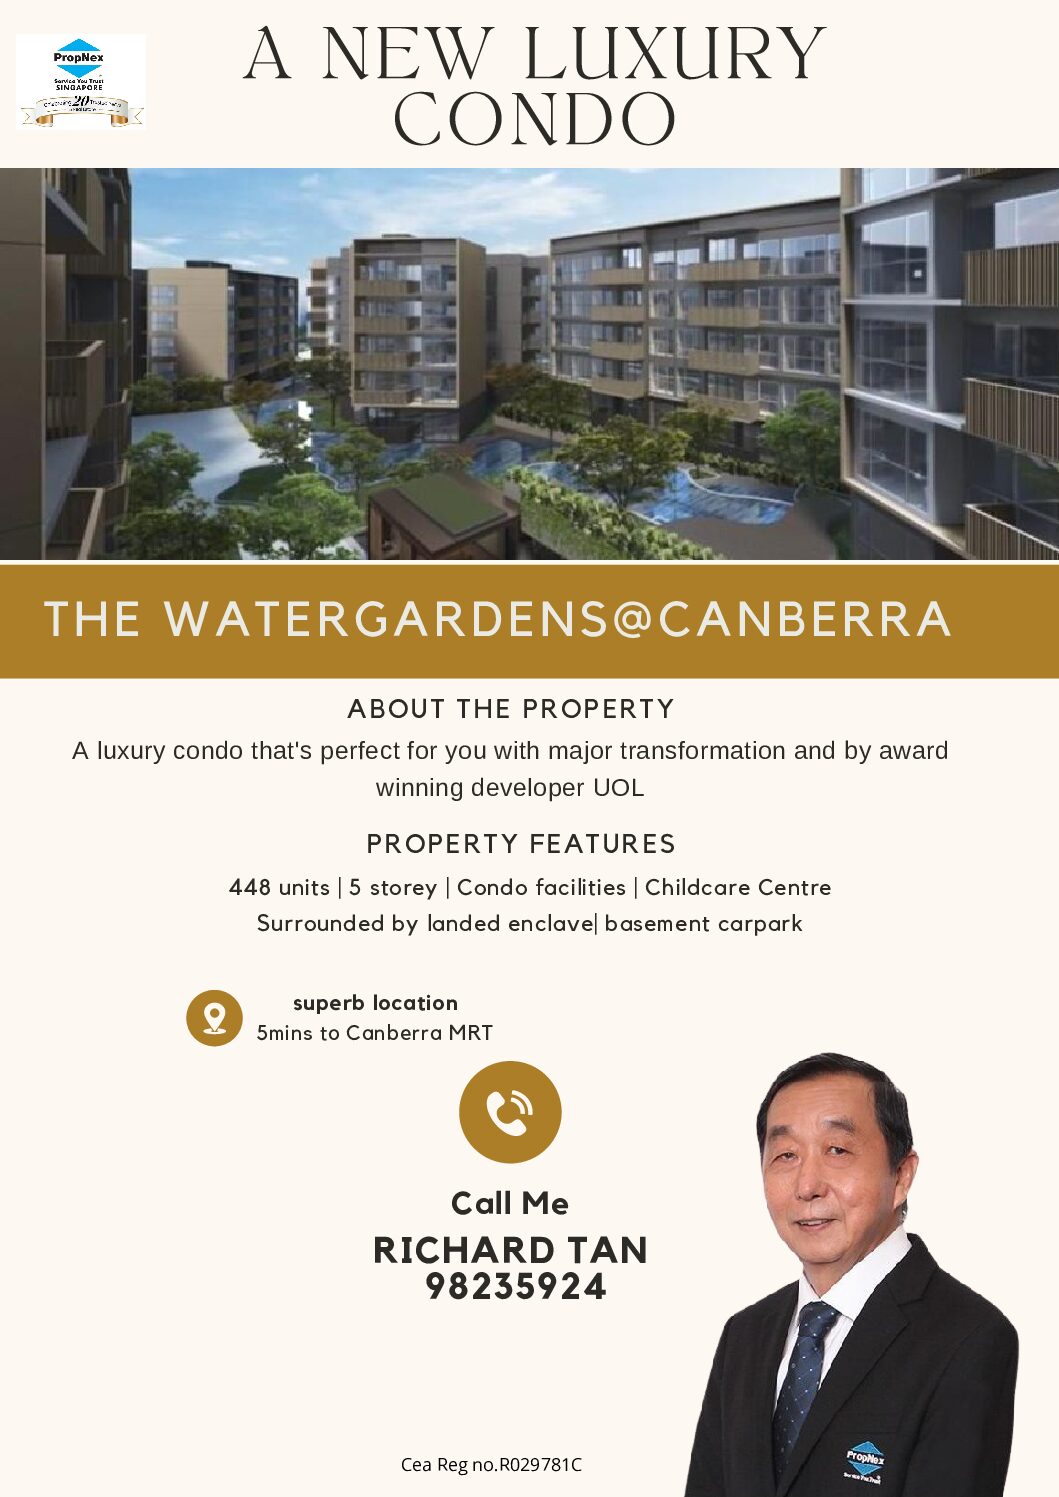 The Watergardens @ Canberra